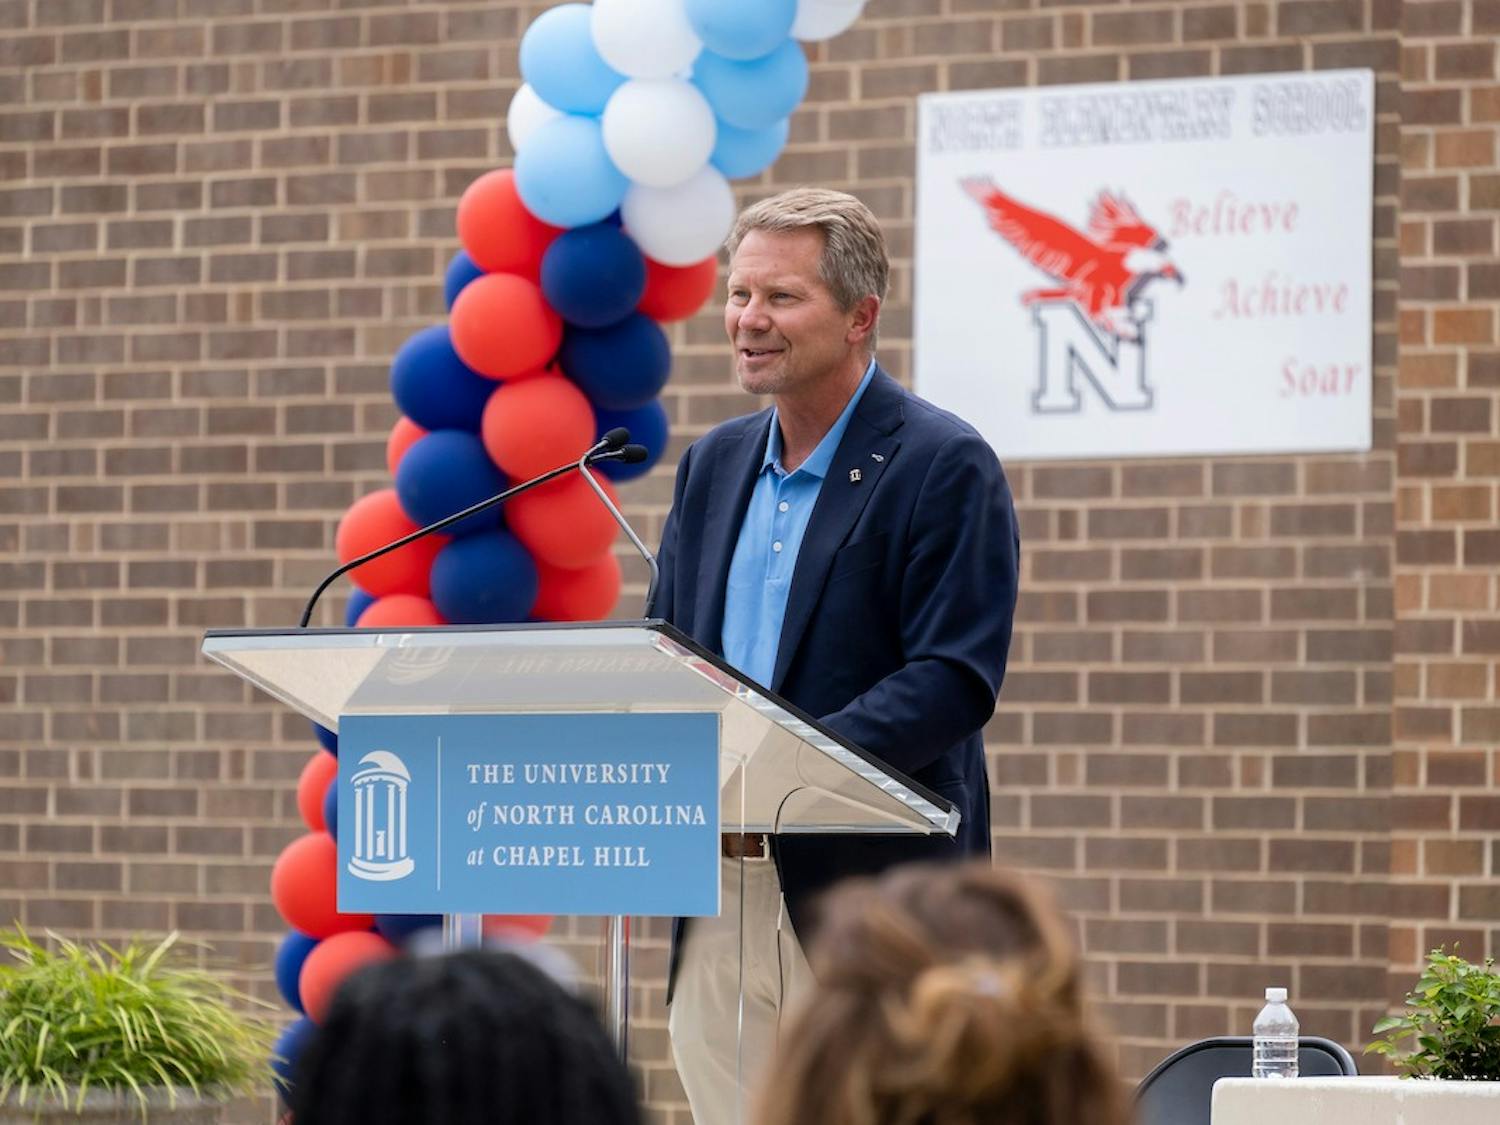 The University of North Carolina at Chapel Hill and Person County Schools held a ribbon cutting ceremony to open the Carolina Community Academy on Thursday, August 25 at North Elementary School in Roxboro, N.C.. In this image, UNC Chancellor Kevin M. Guskiewicz makes remarks. 
Photo Courtesy of Jon Gardiner/UNC-Chapel Hill. 